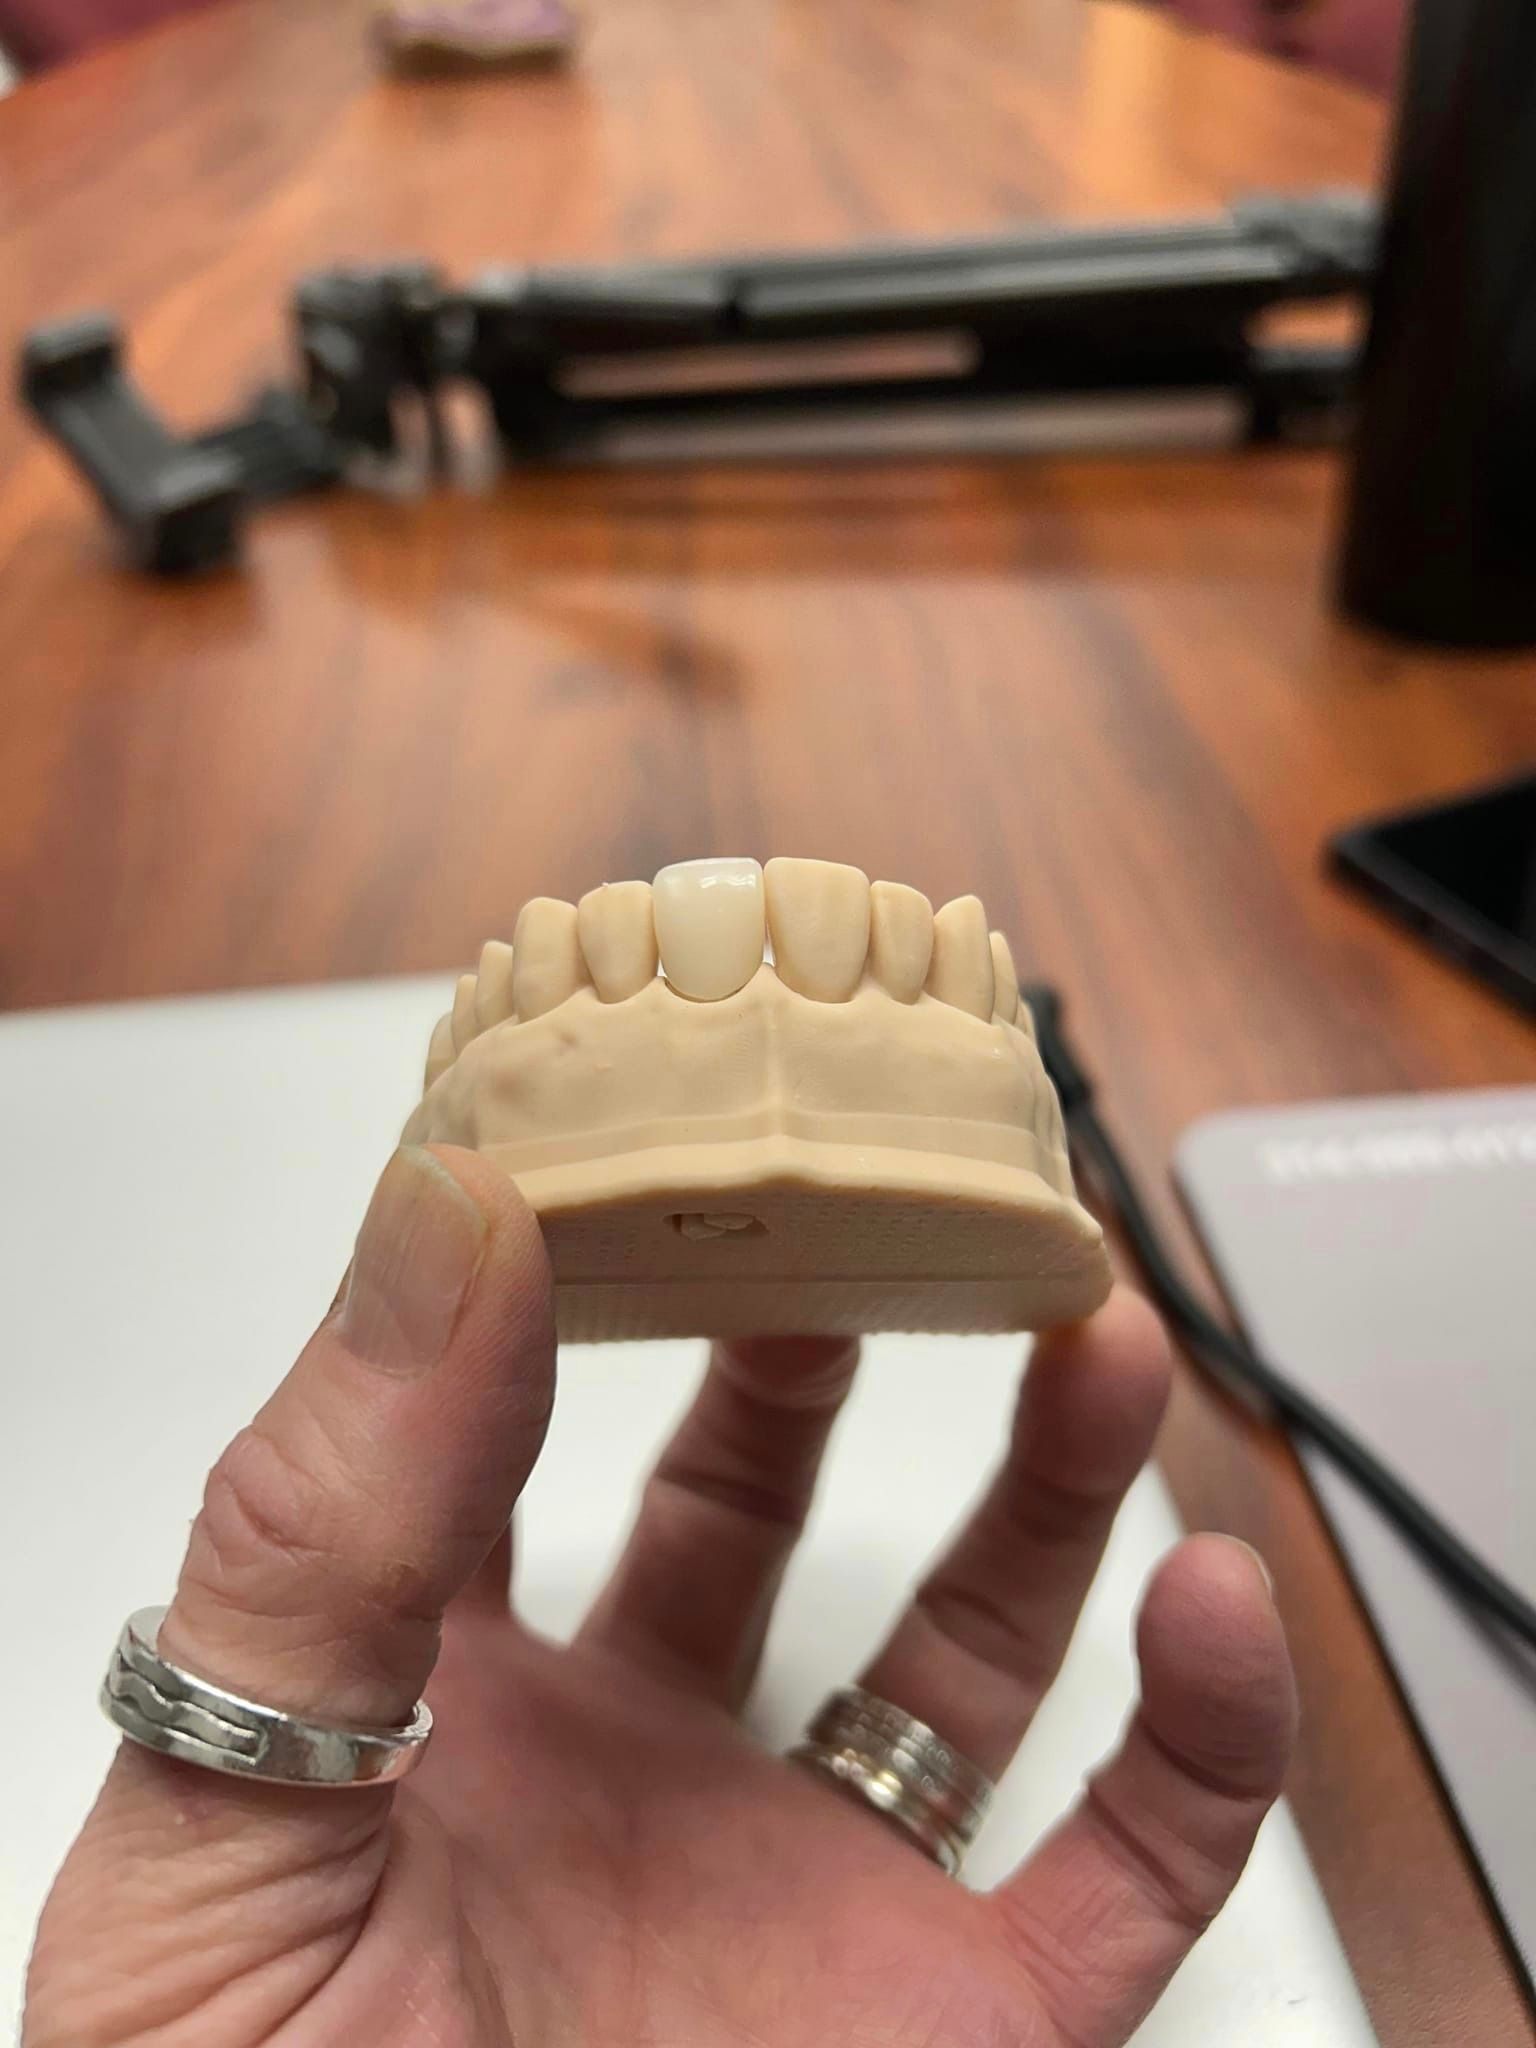 How 3D printed dental crowns are changing the dental world